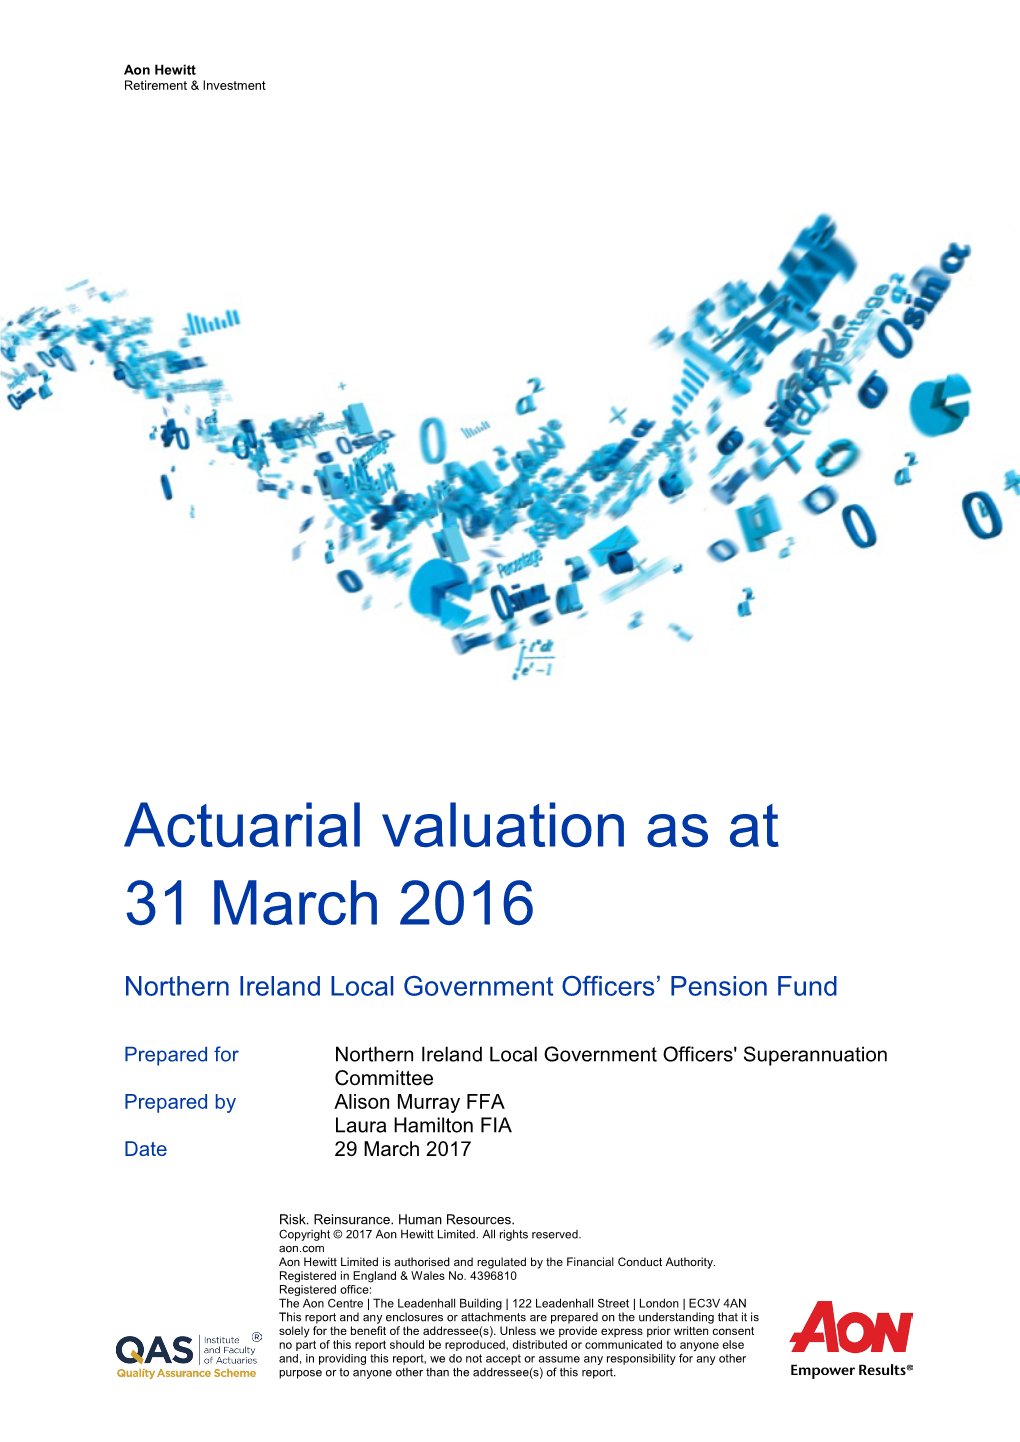 Actuarial Valuation As at 31 March 2016